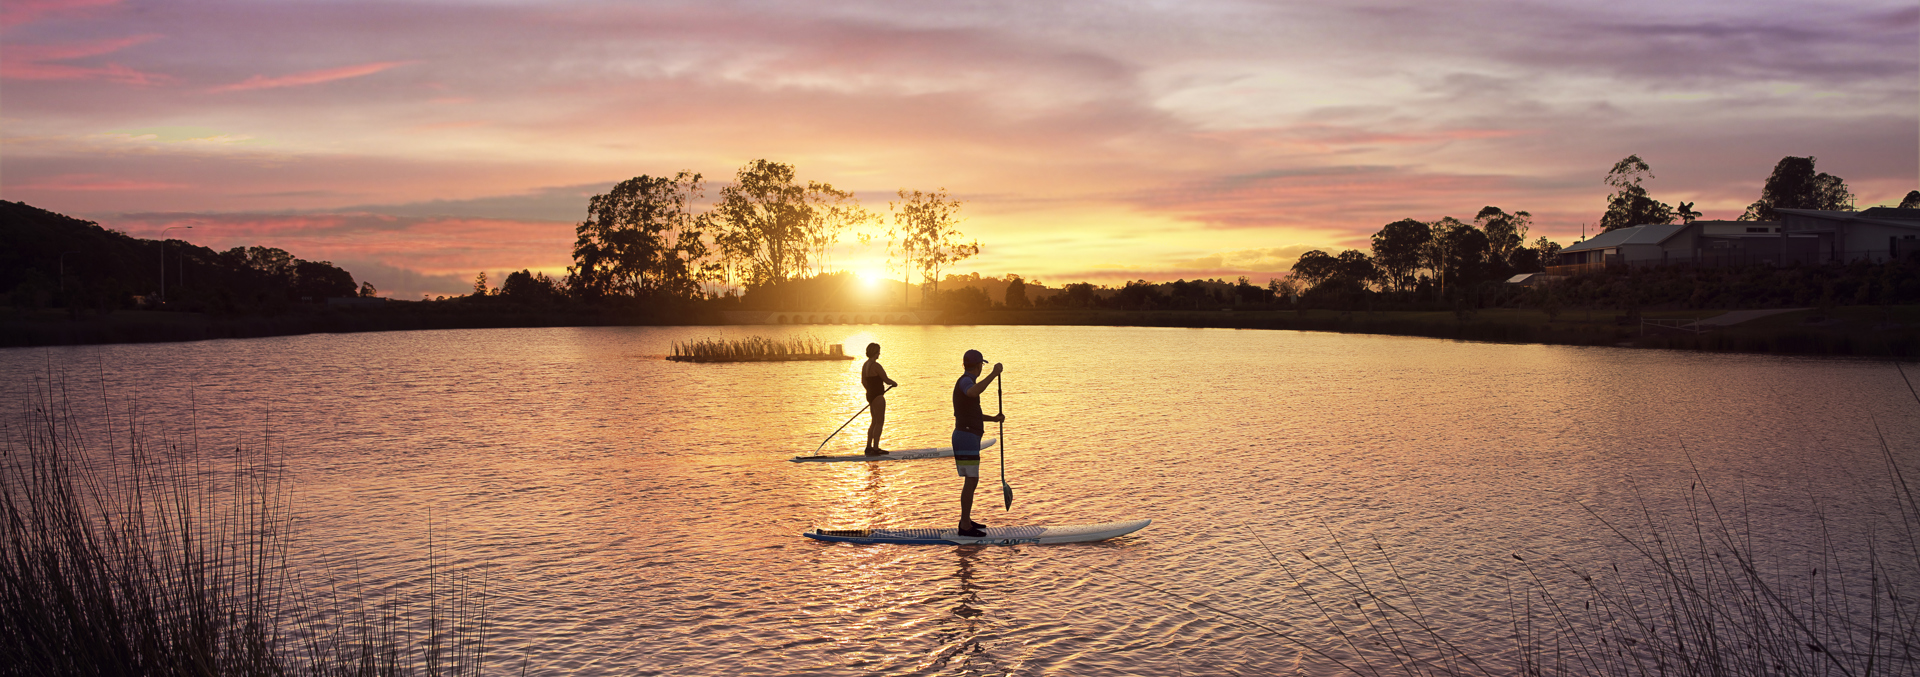 Homeowners enjoy an early morning sunrise and stand up paddle in the Stockland Halcyon Lakeside lake